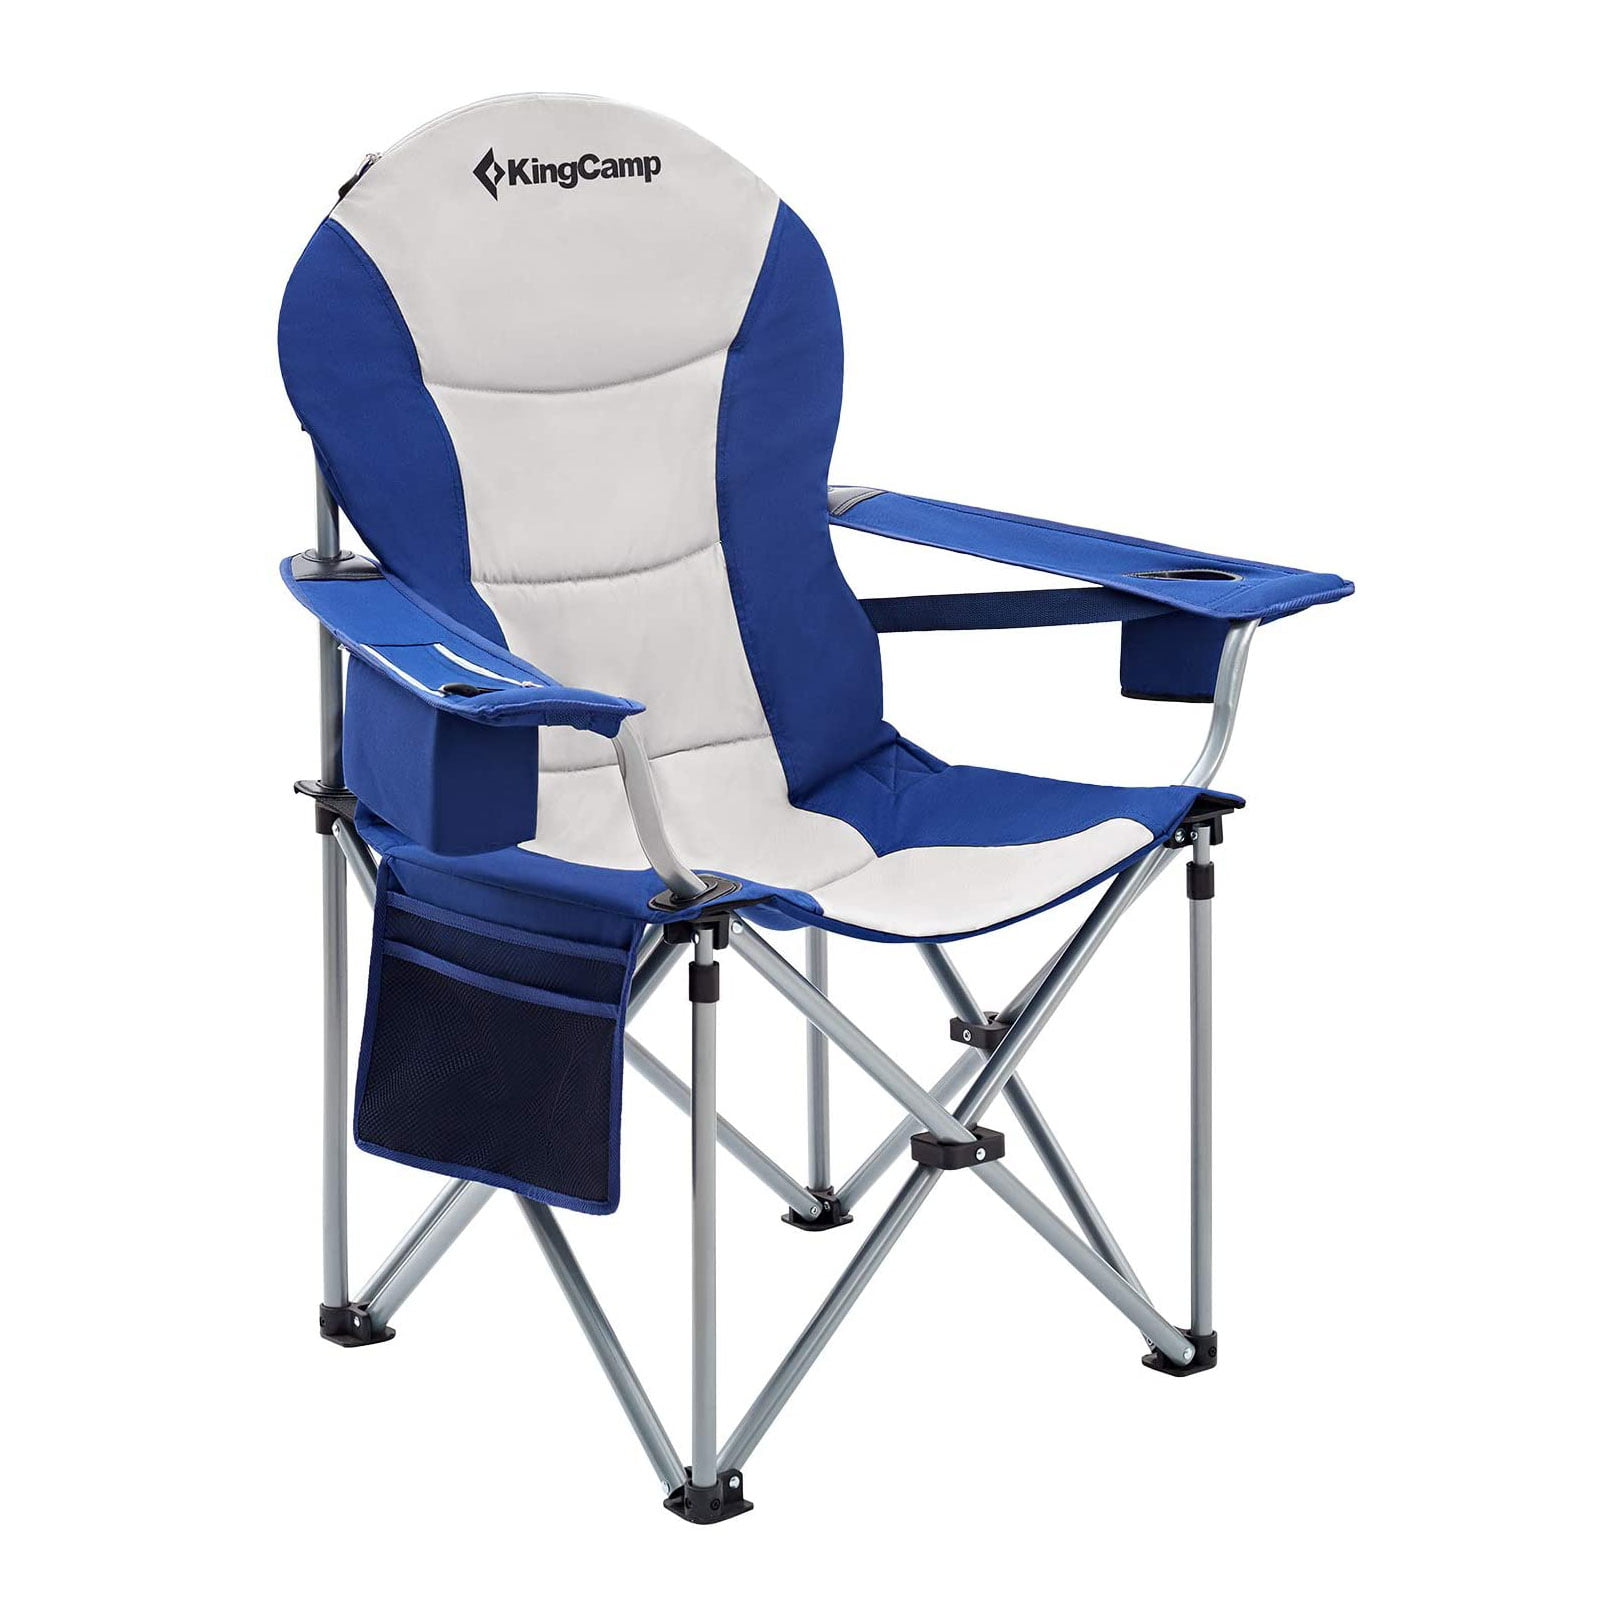 KingCamp Heavy Duty Camping Folding Director Chair Oversize Padded 